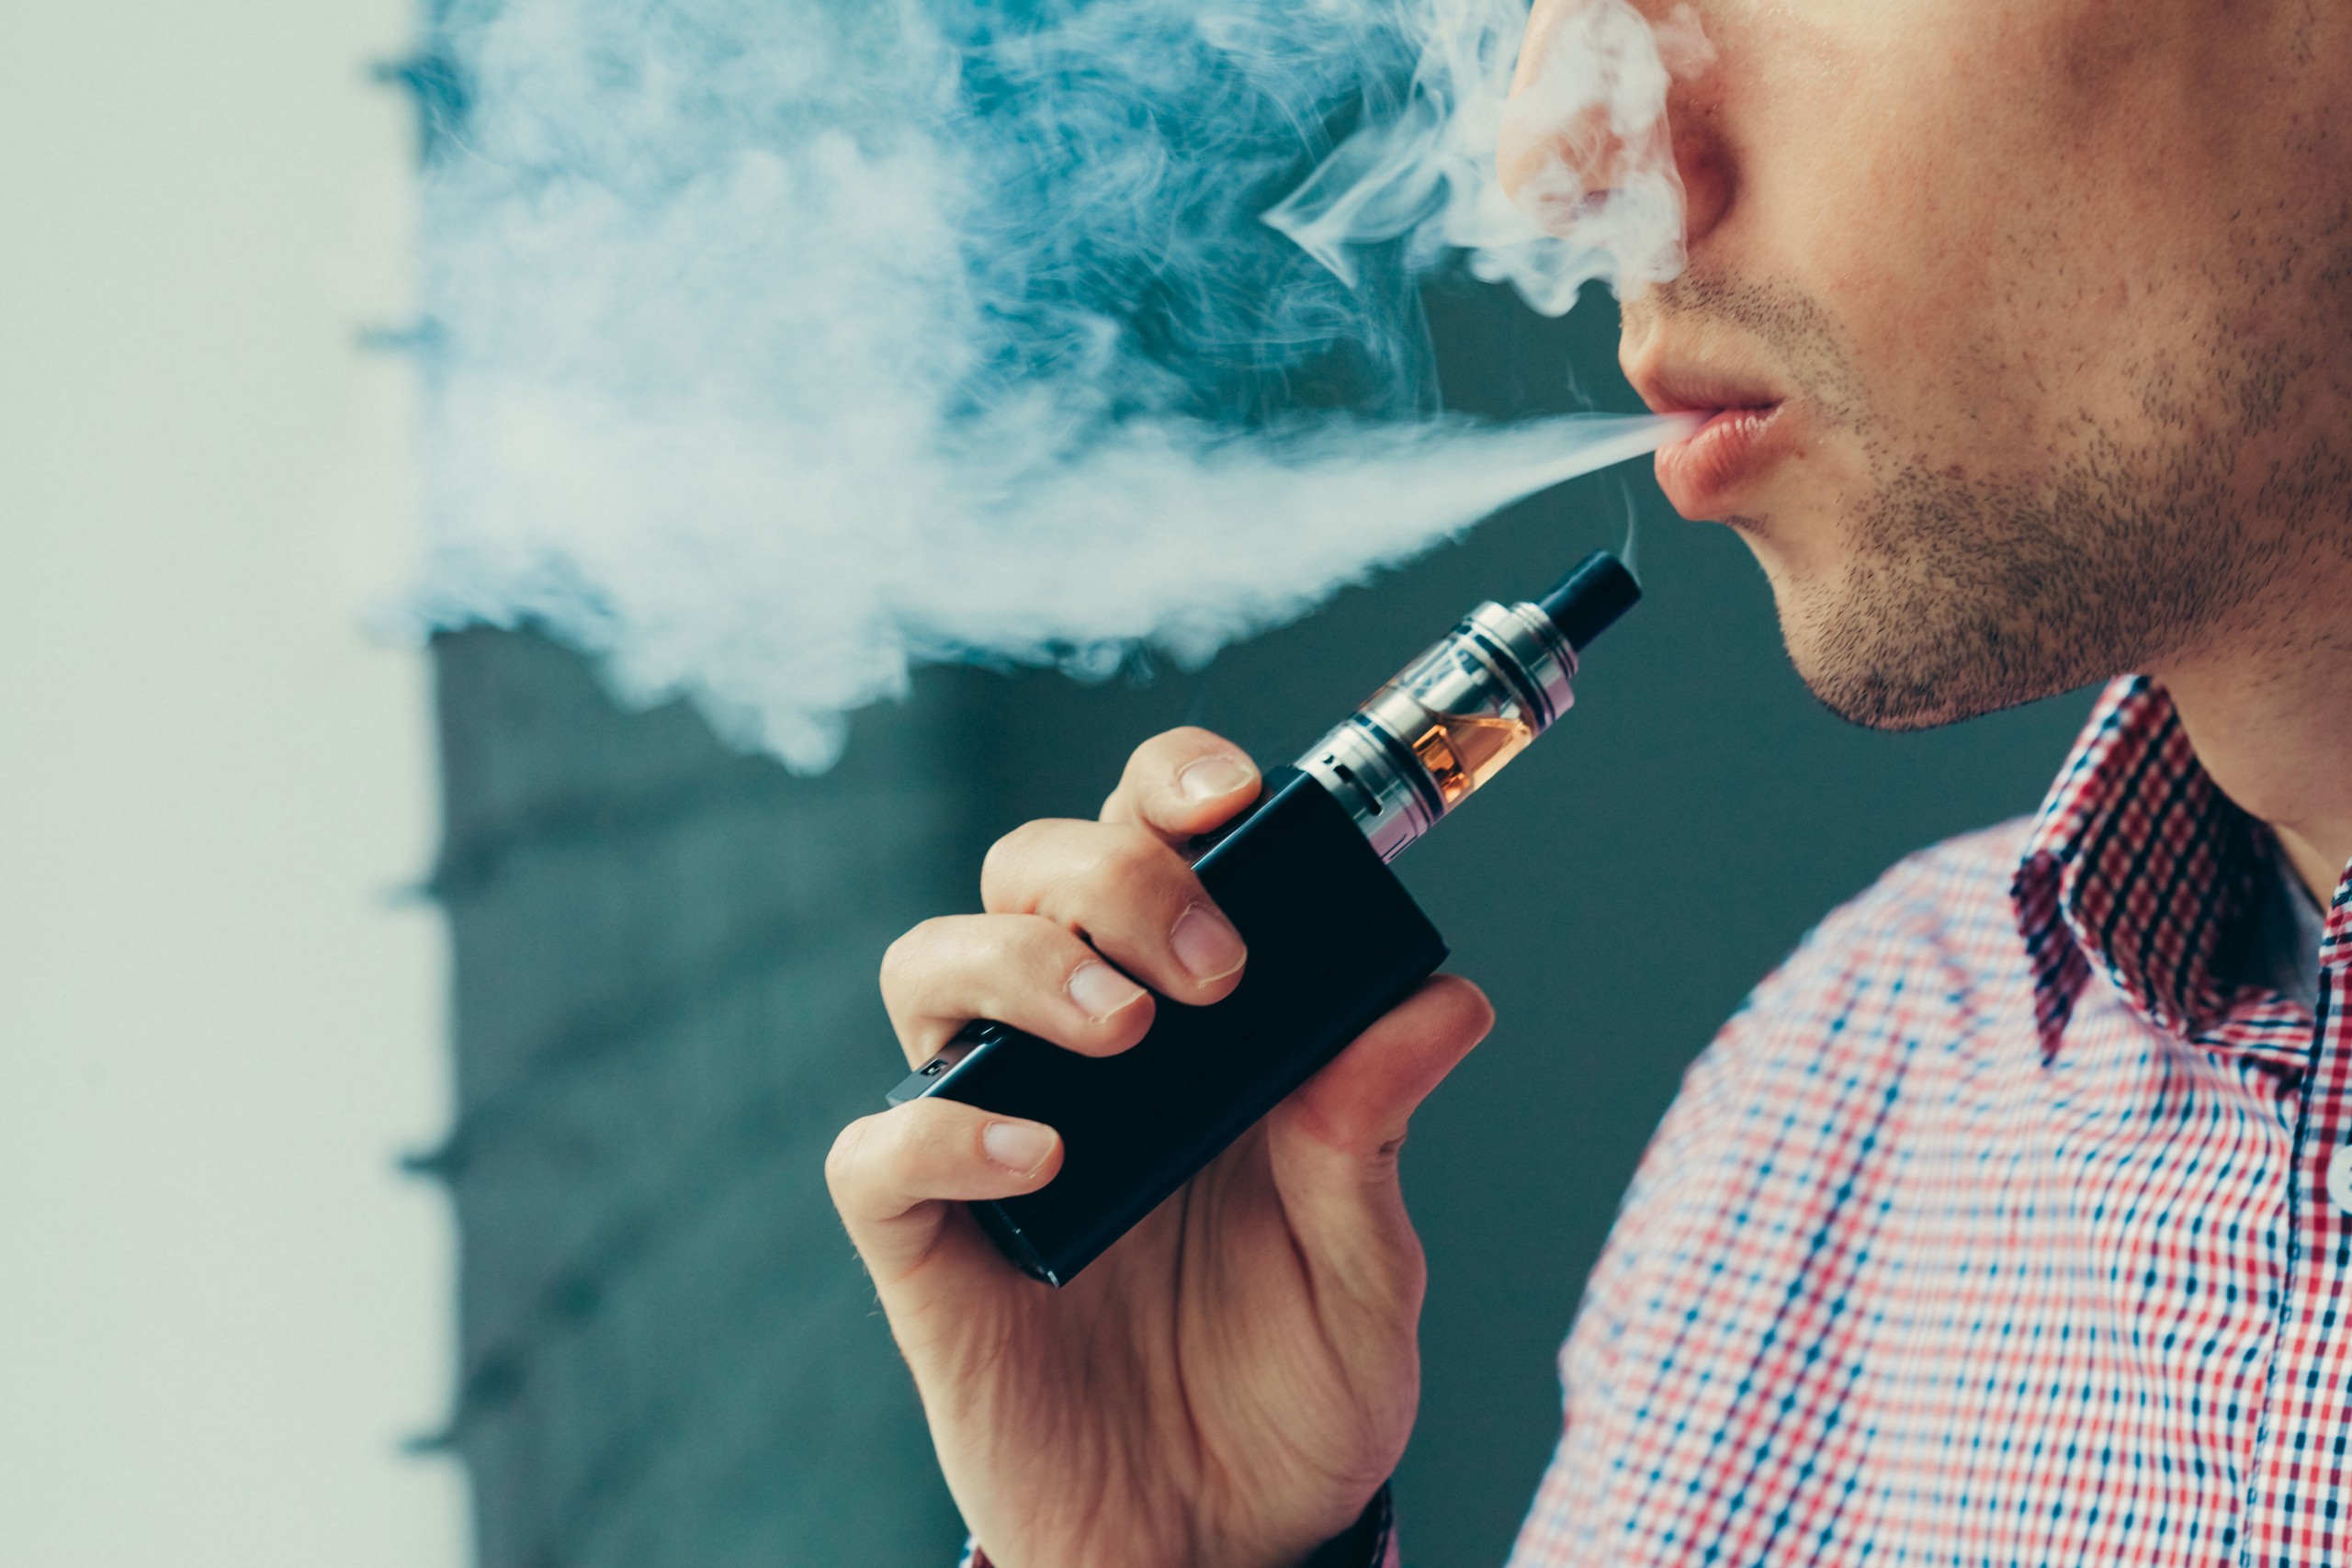 Does Vaping Cause Lung Cancer?